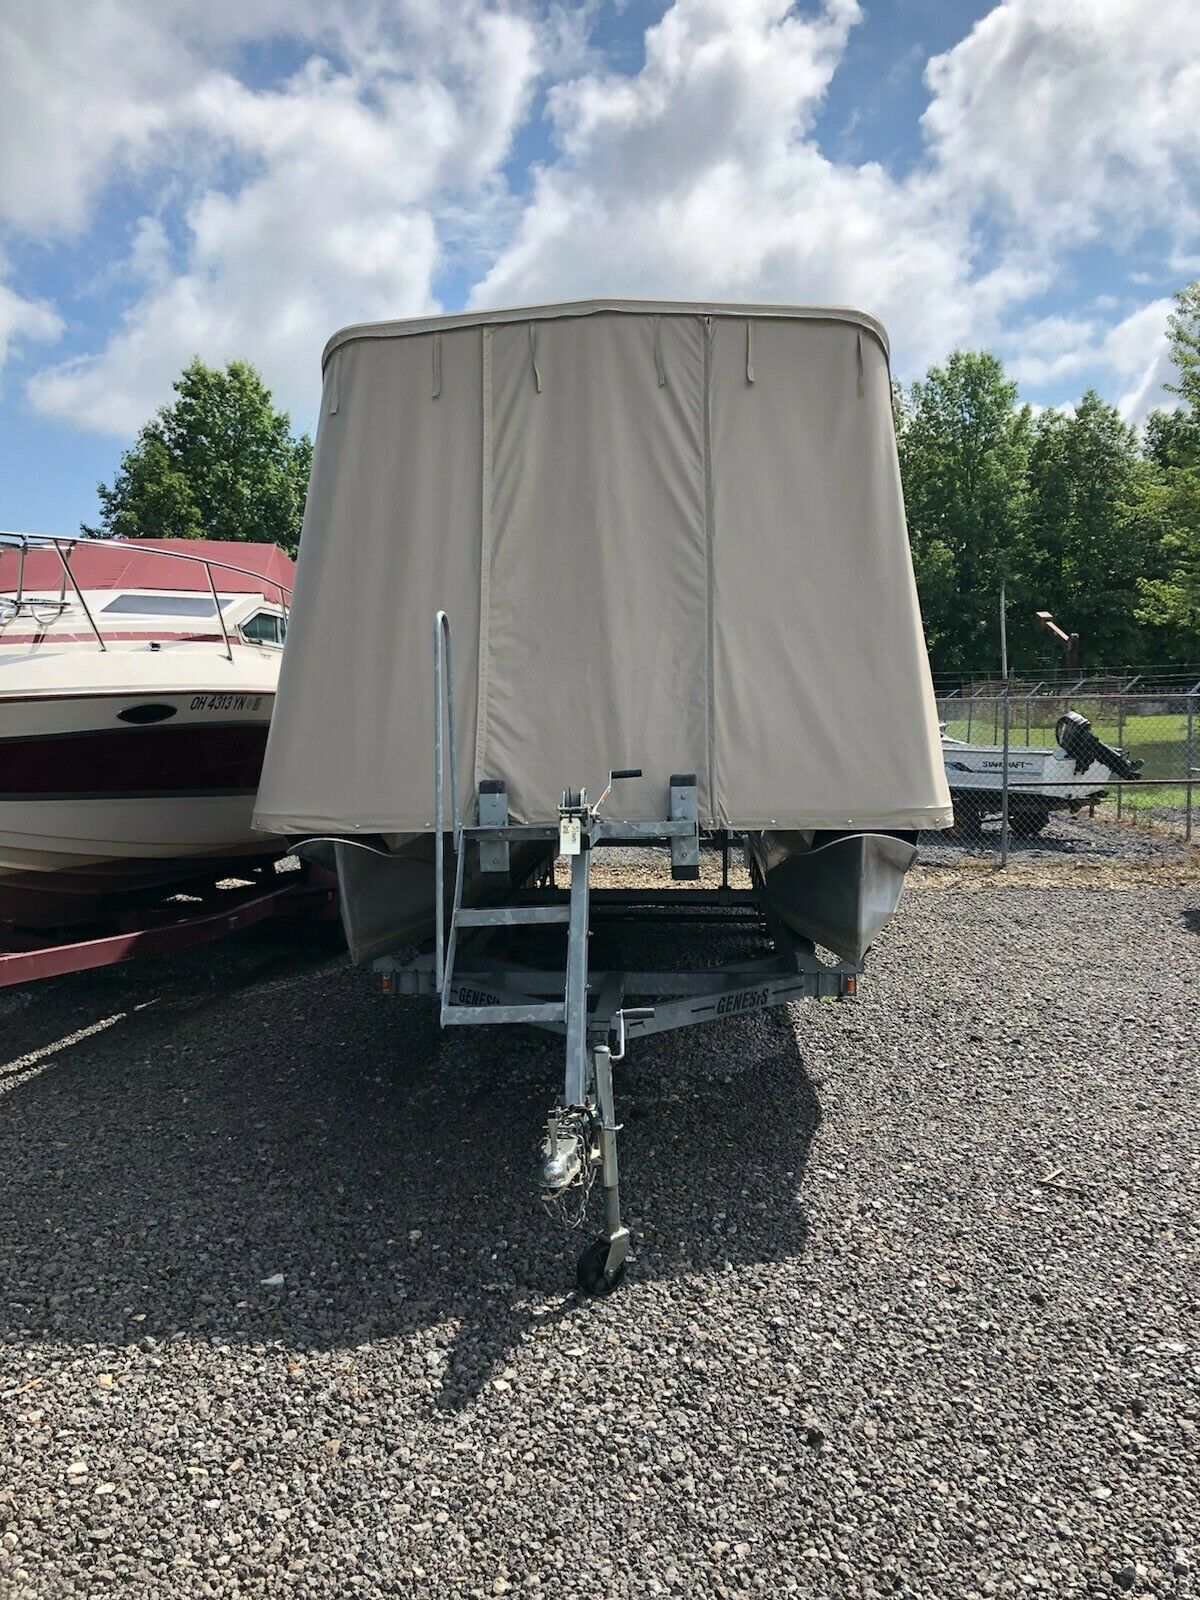 Avalon DC Elite Avalon DC Elite 2007 for sale for $9,500 - Boats-from ...